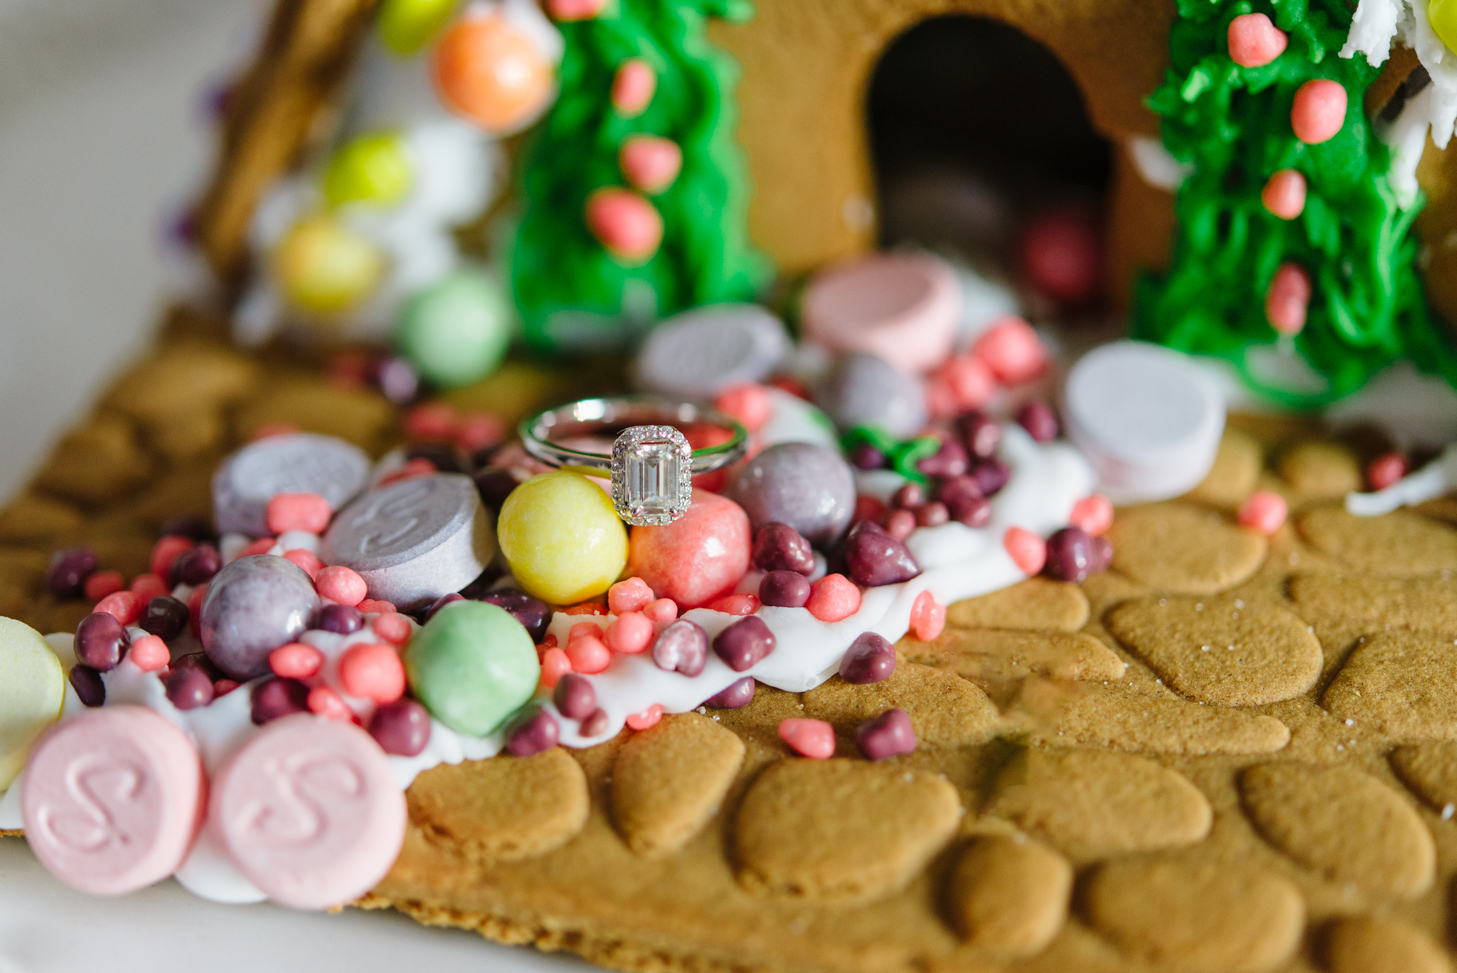 Walmart synthetic diamond engagement ring sits on a colorful candy path of a gingerbread house